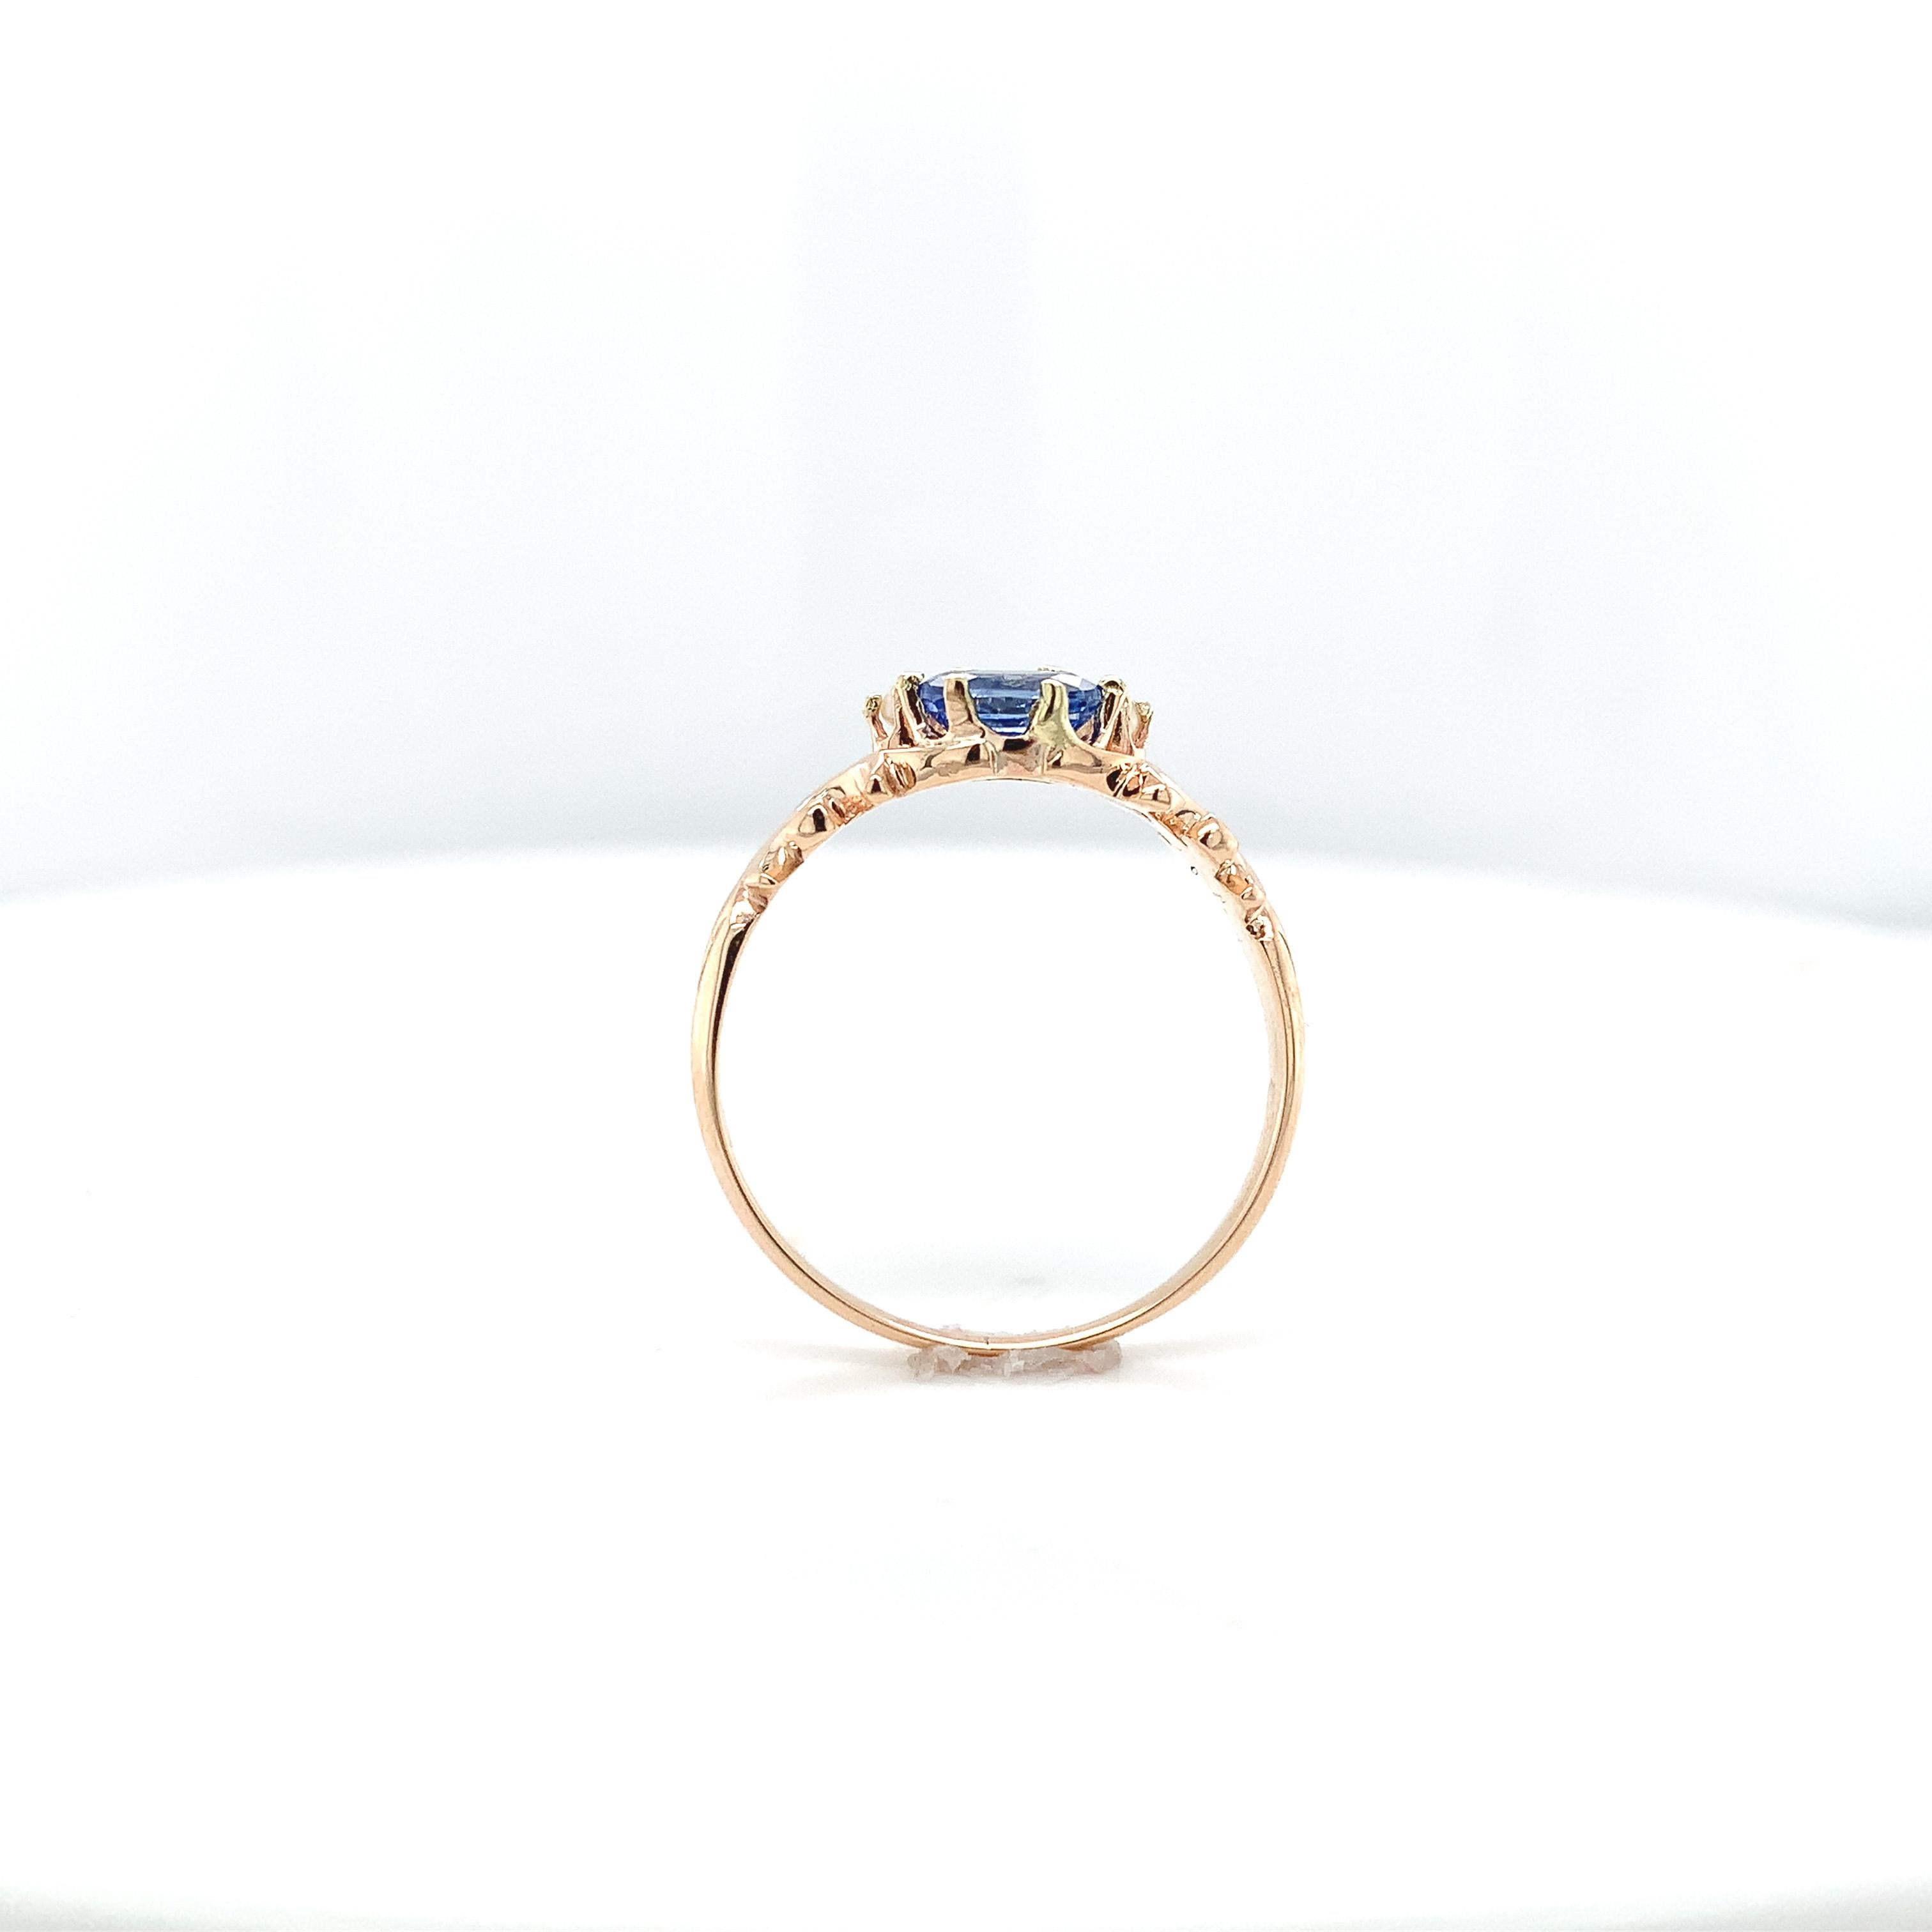 Victorian 10K rose gold ring featuring 2 oval blue sapphires.  The sapphires weigh 1.14 carats total. The sapphires are medium light lavender-blue ceylon color and measure about 6mm x 4mm. There are 2 small seed pearl accents. The ring fits a size 8